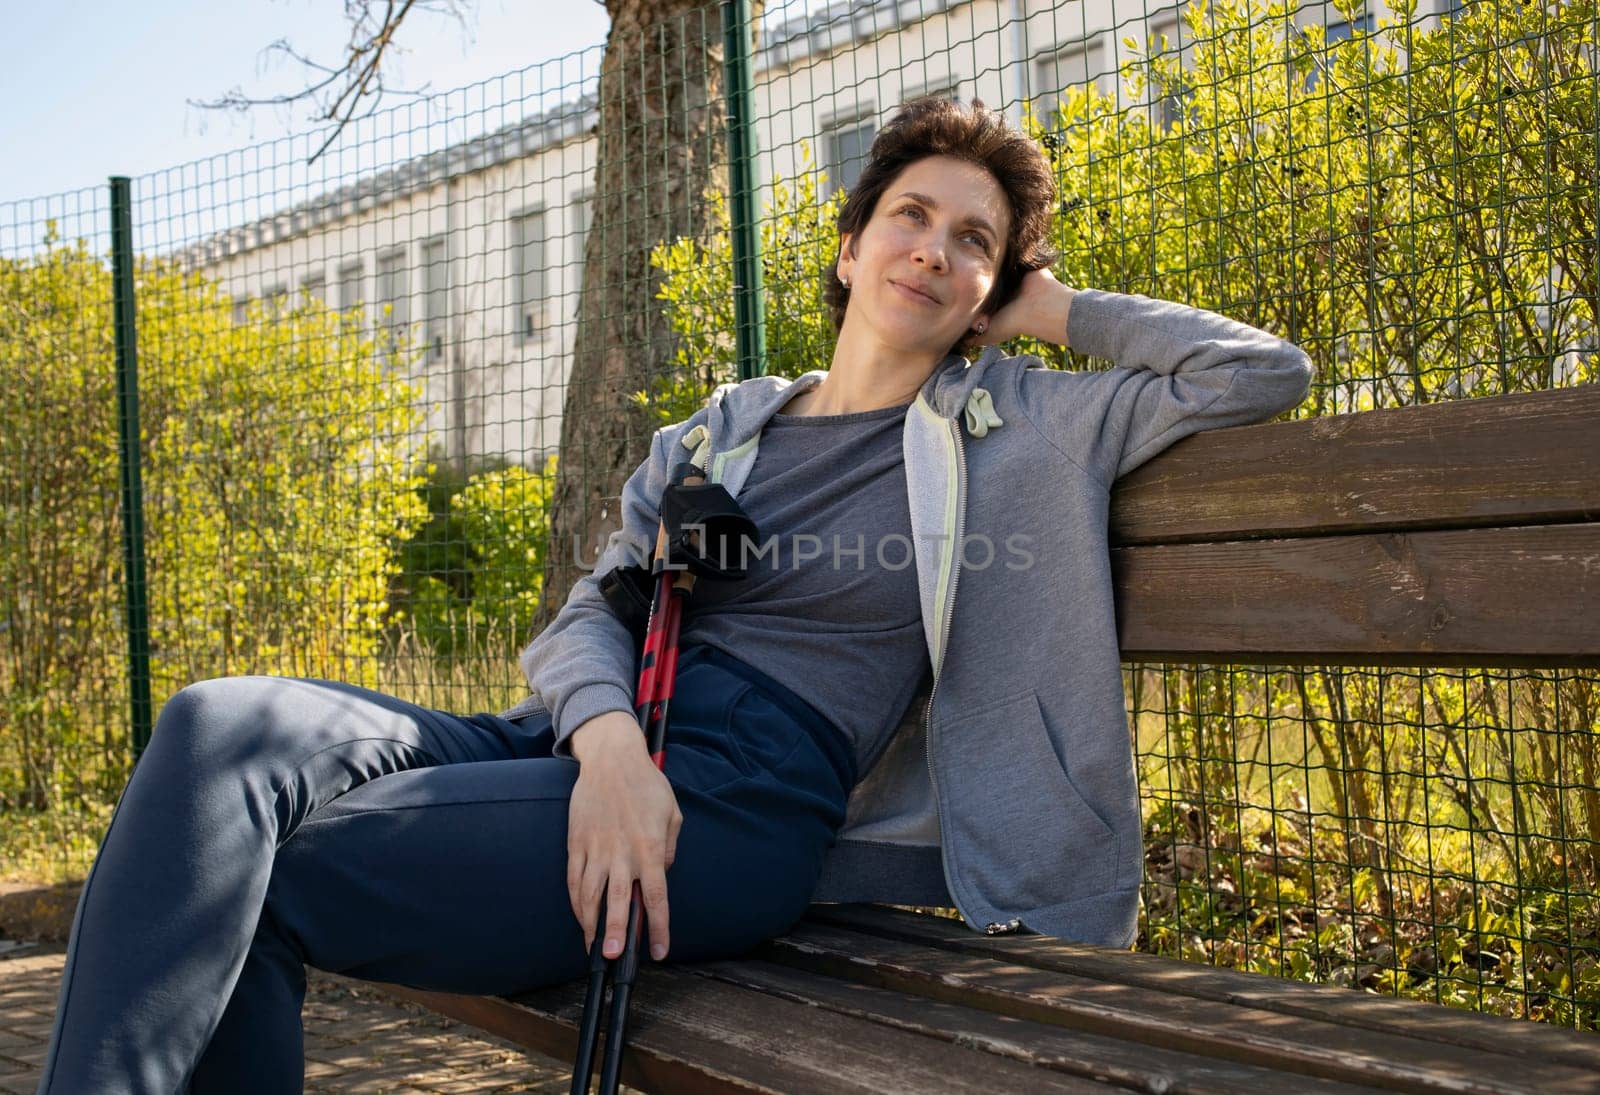 Happy Resting, Relaxing Woman Sits on Bench Holding Poles After Nordic Walking. Beautiful Happy Caucasian Woman Enjoys Sunny Day. Physical Activity With Walking Poles. Outdoor Recreation. Horizontal.